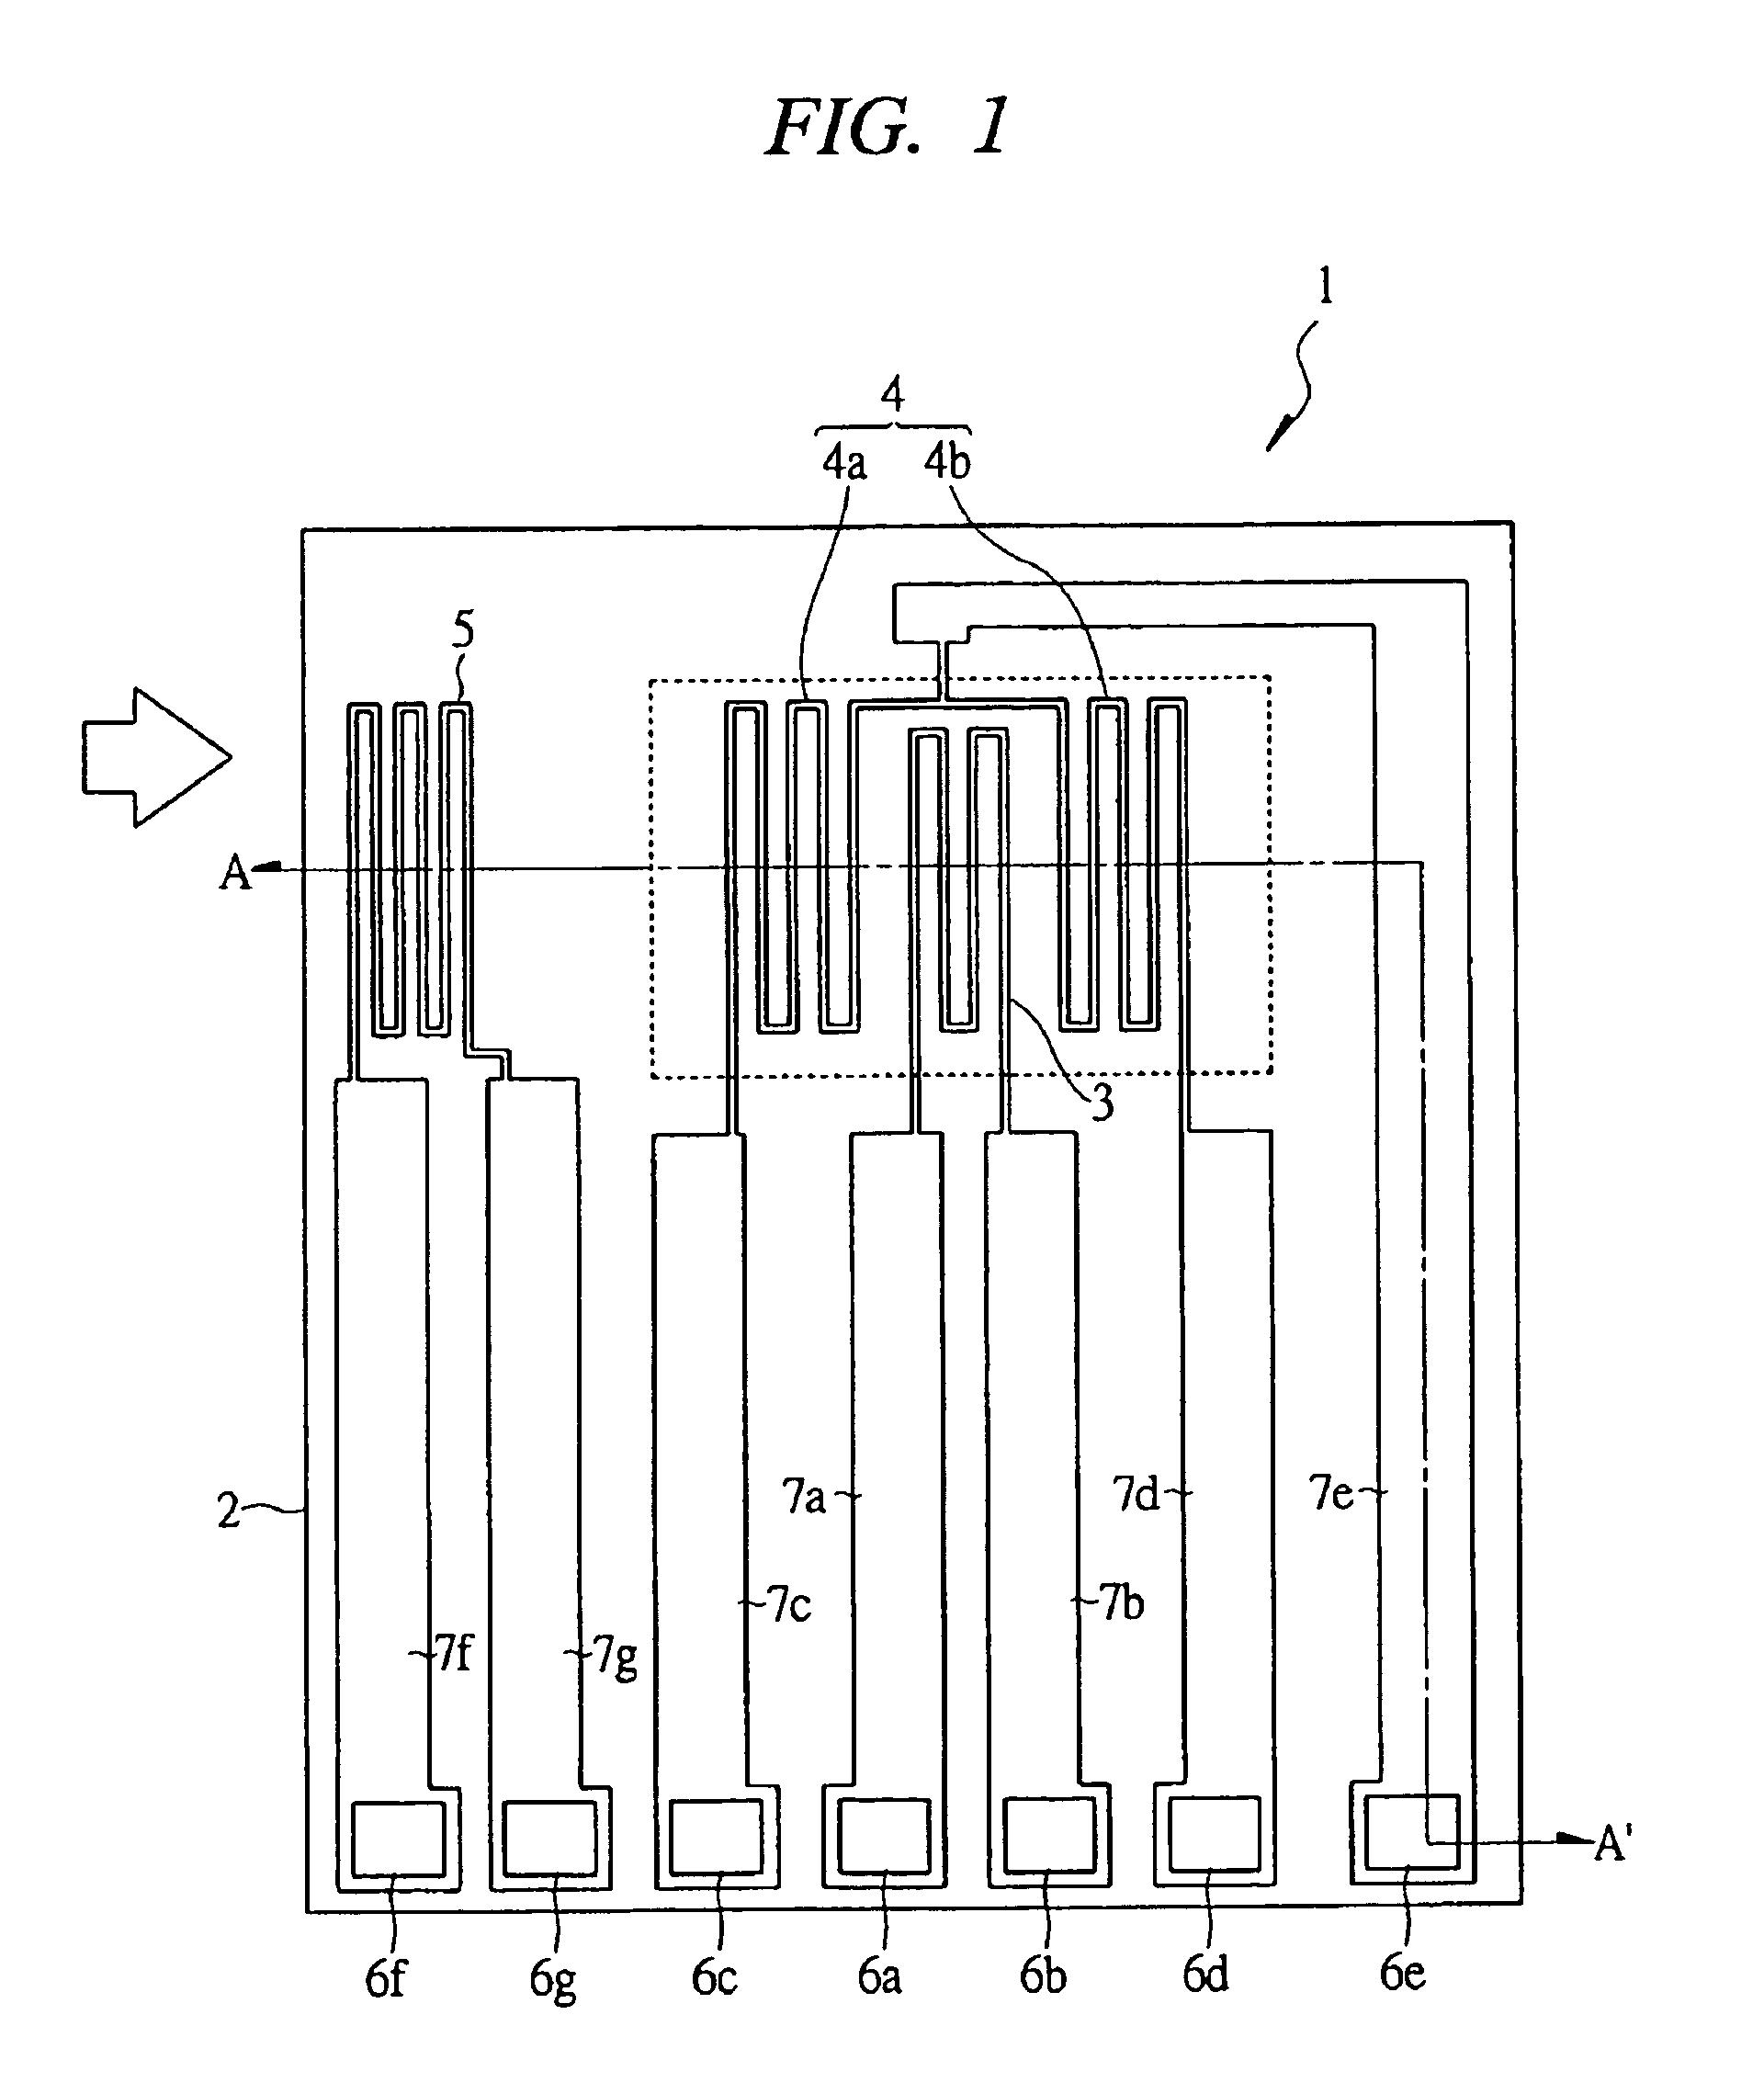 Flow sensor using a heat element and a resistance temperature detector formed of a metal film